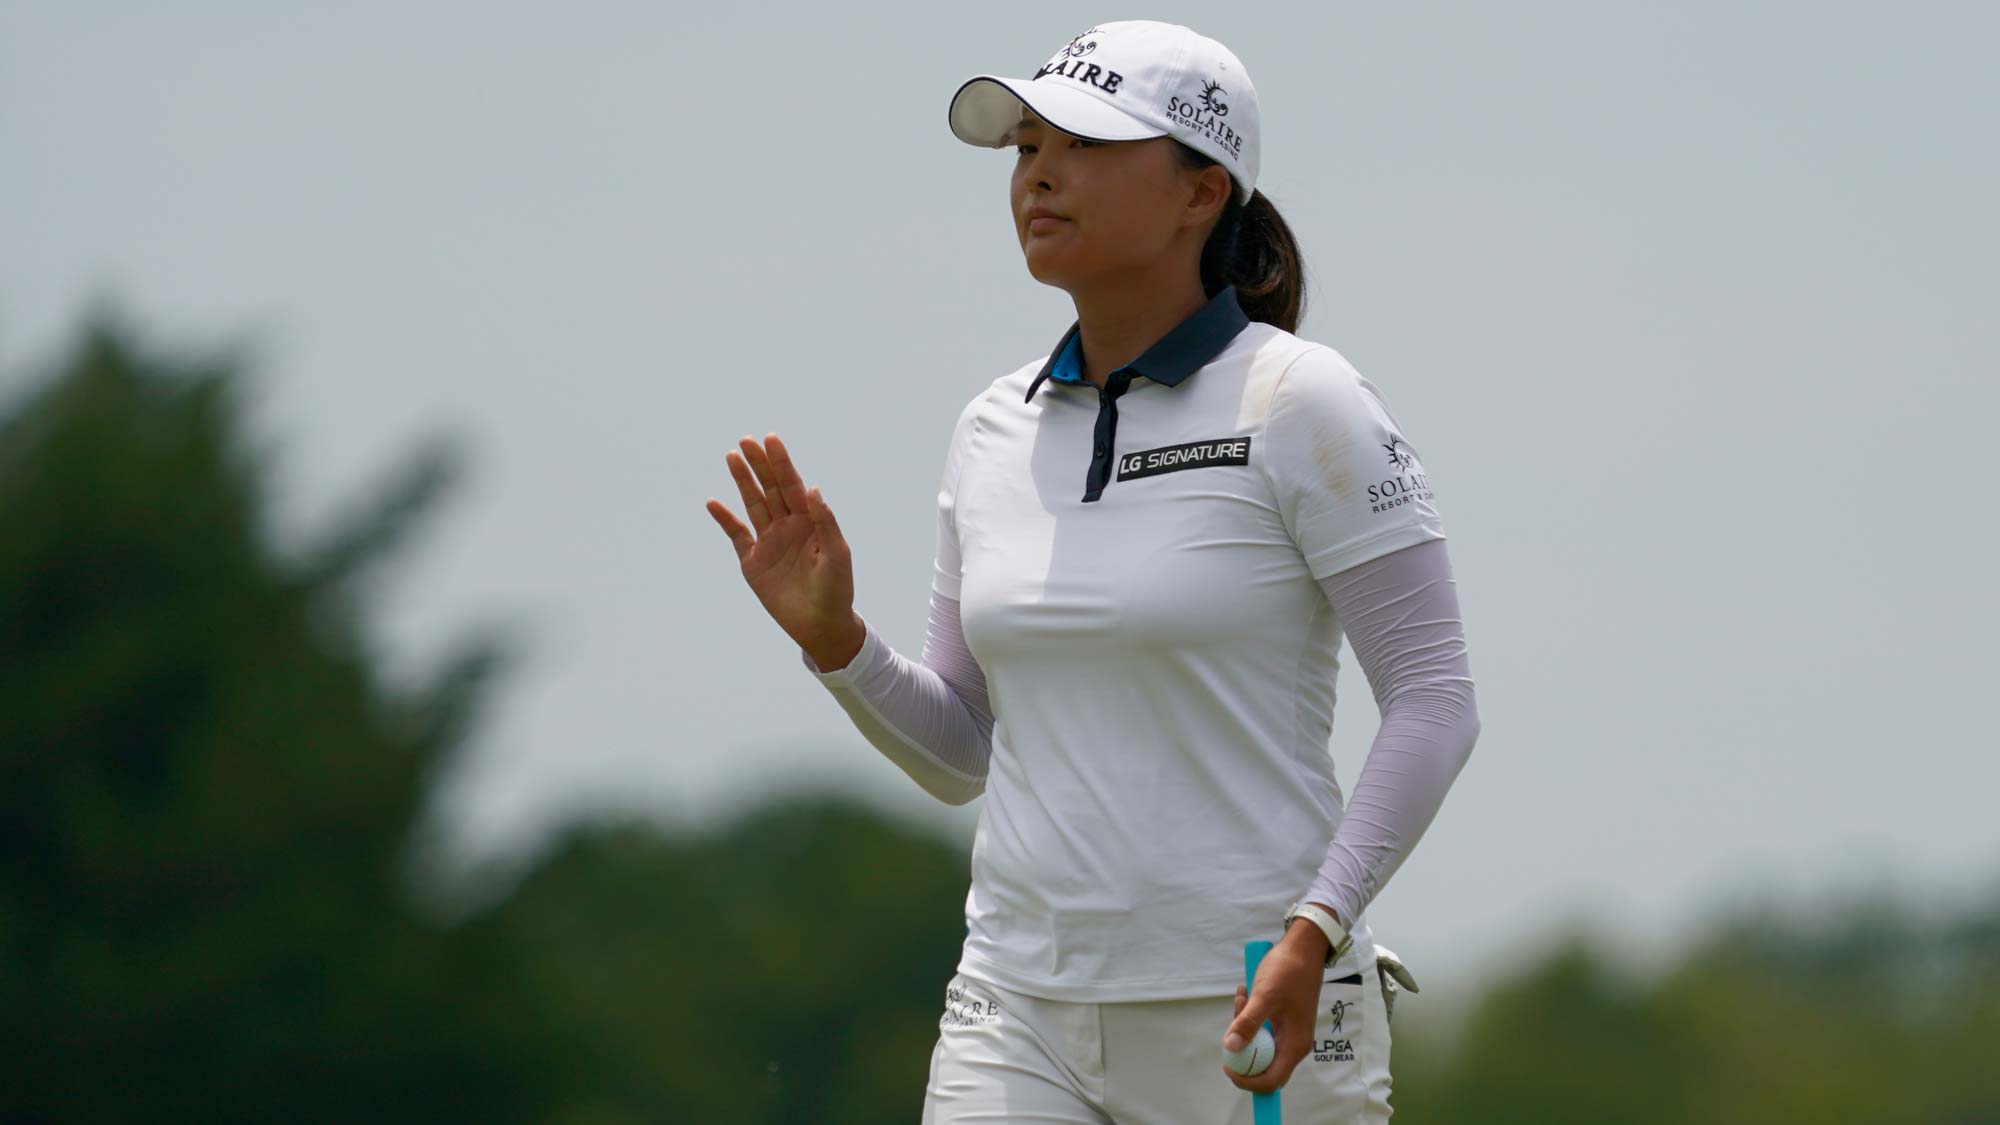 Jin Young Ko of Korea reacts to the crowd after her birdie putt on the second hole during the final round of the Volunteers of America Classic